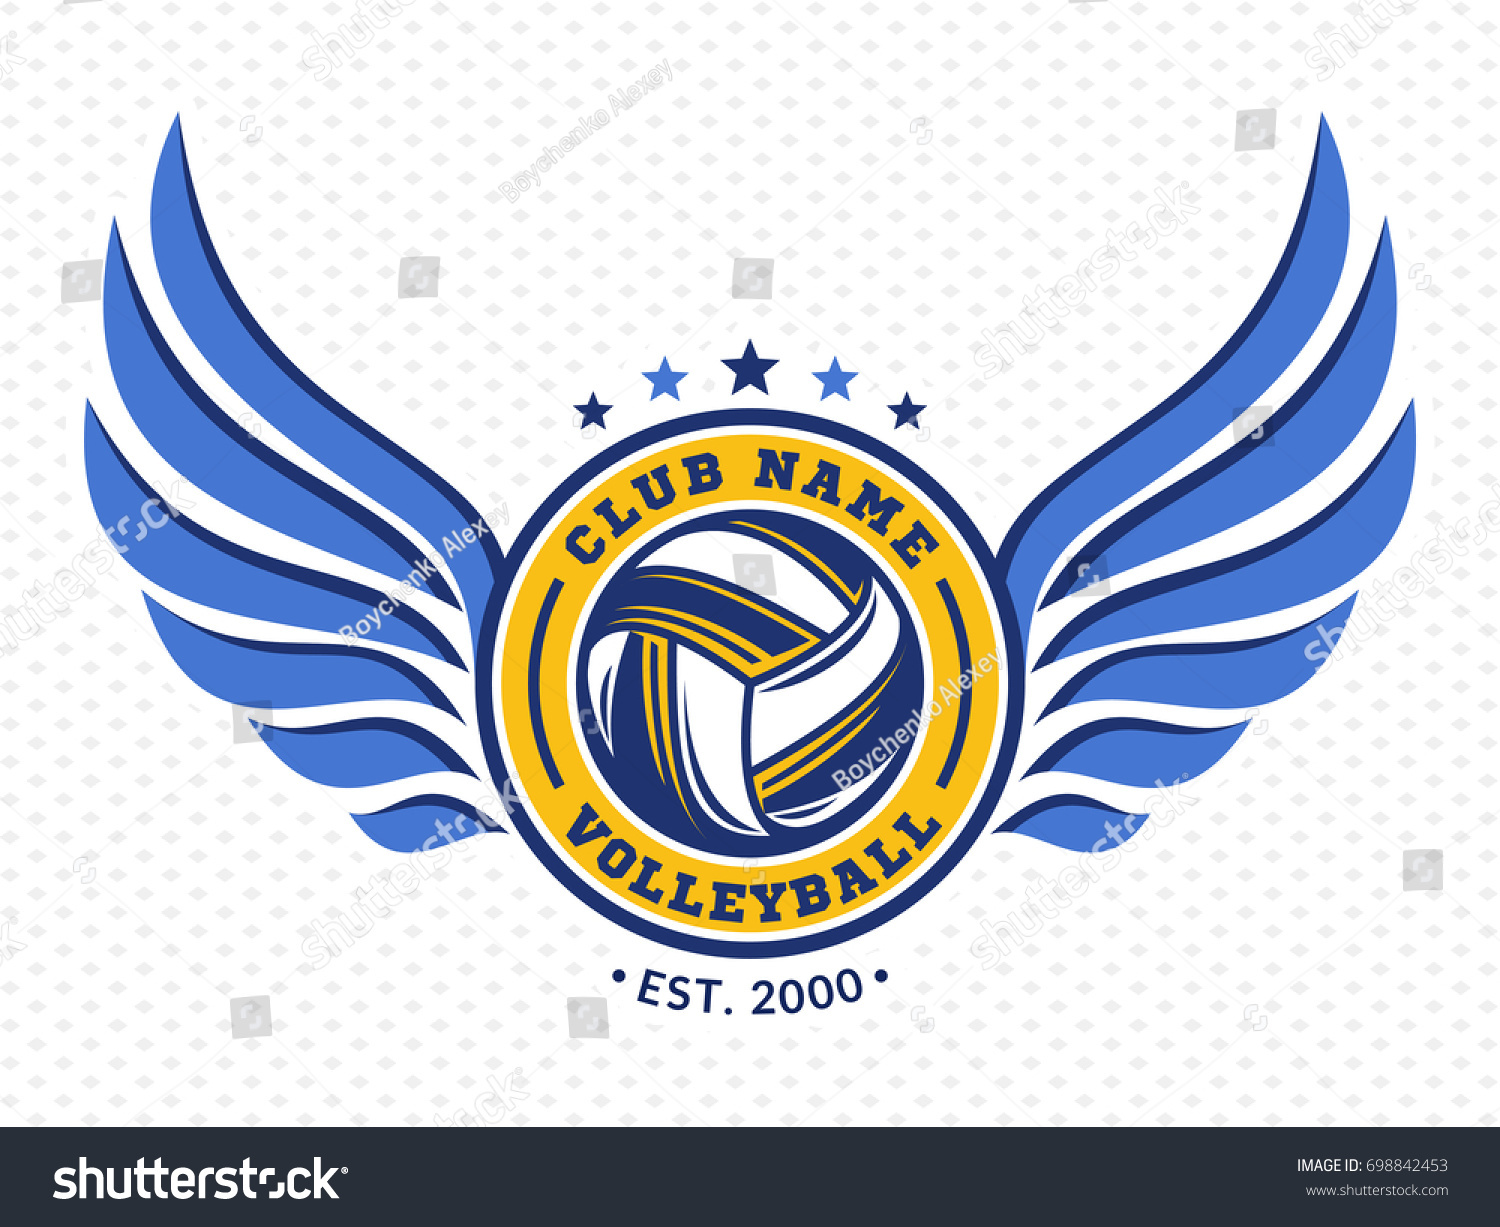 Download Volleyball Club Logo Emblem Icons Designs Stock Vector ...